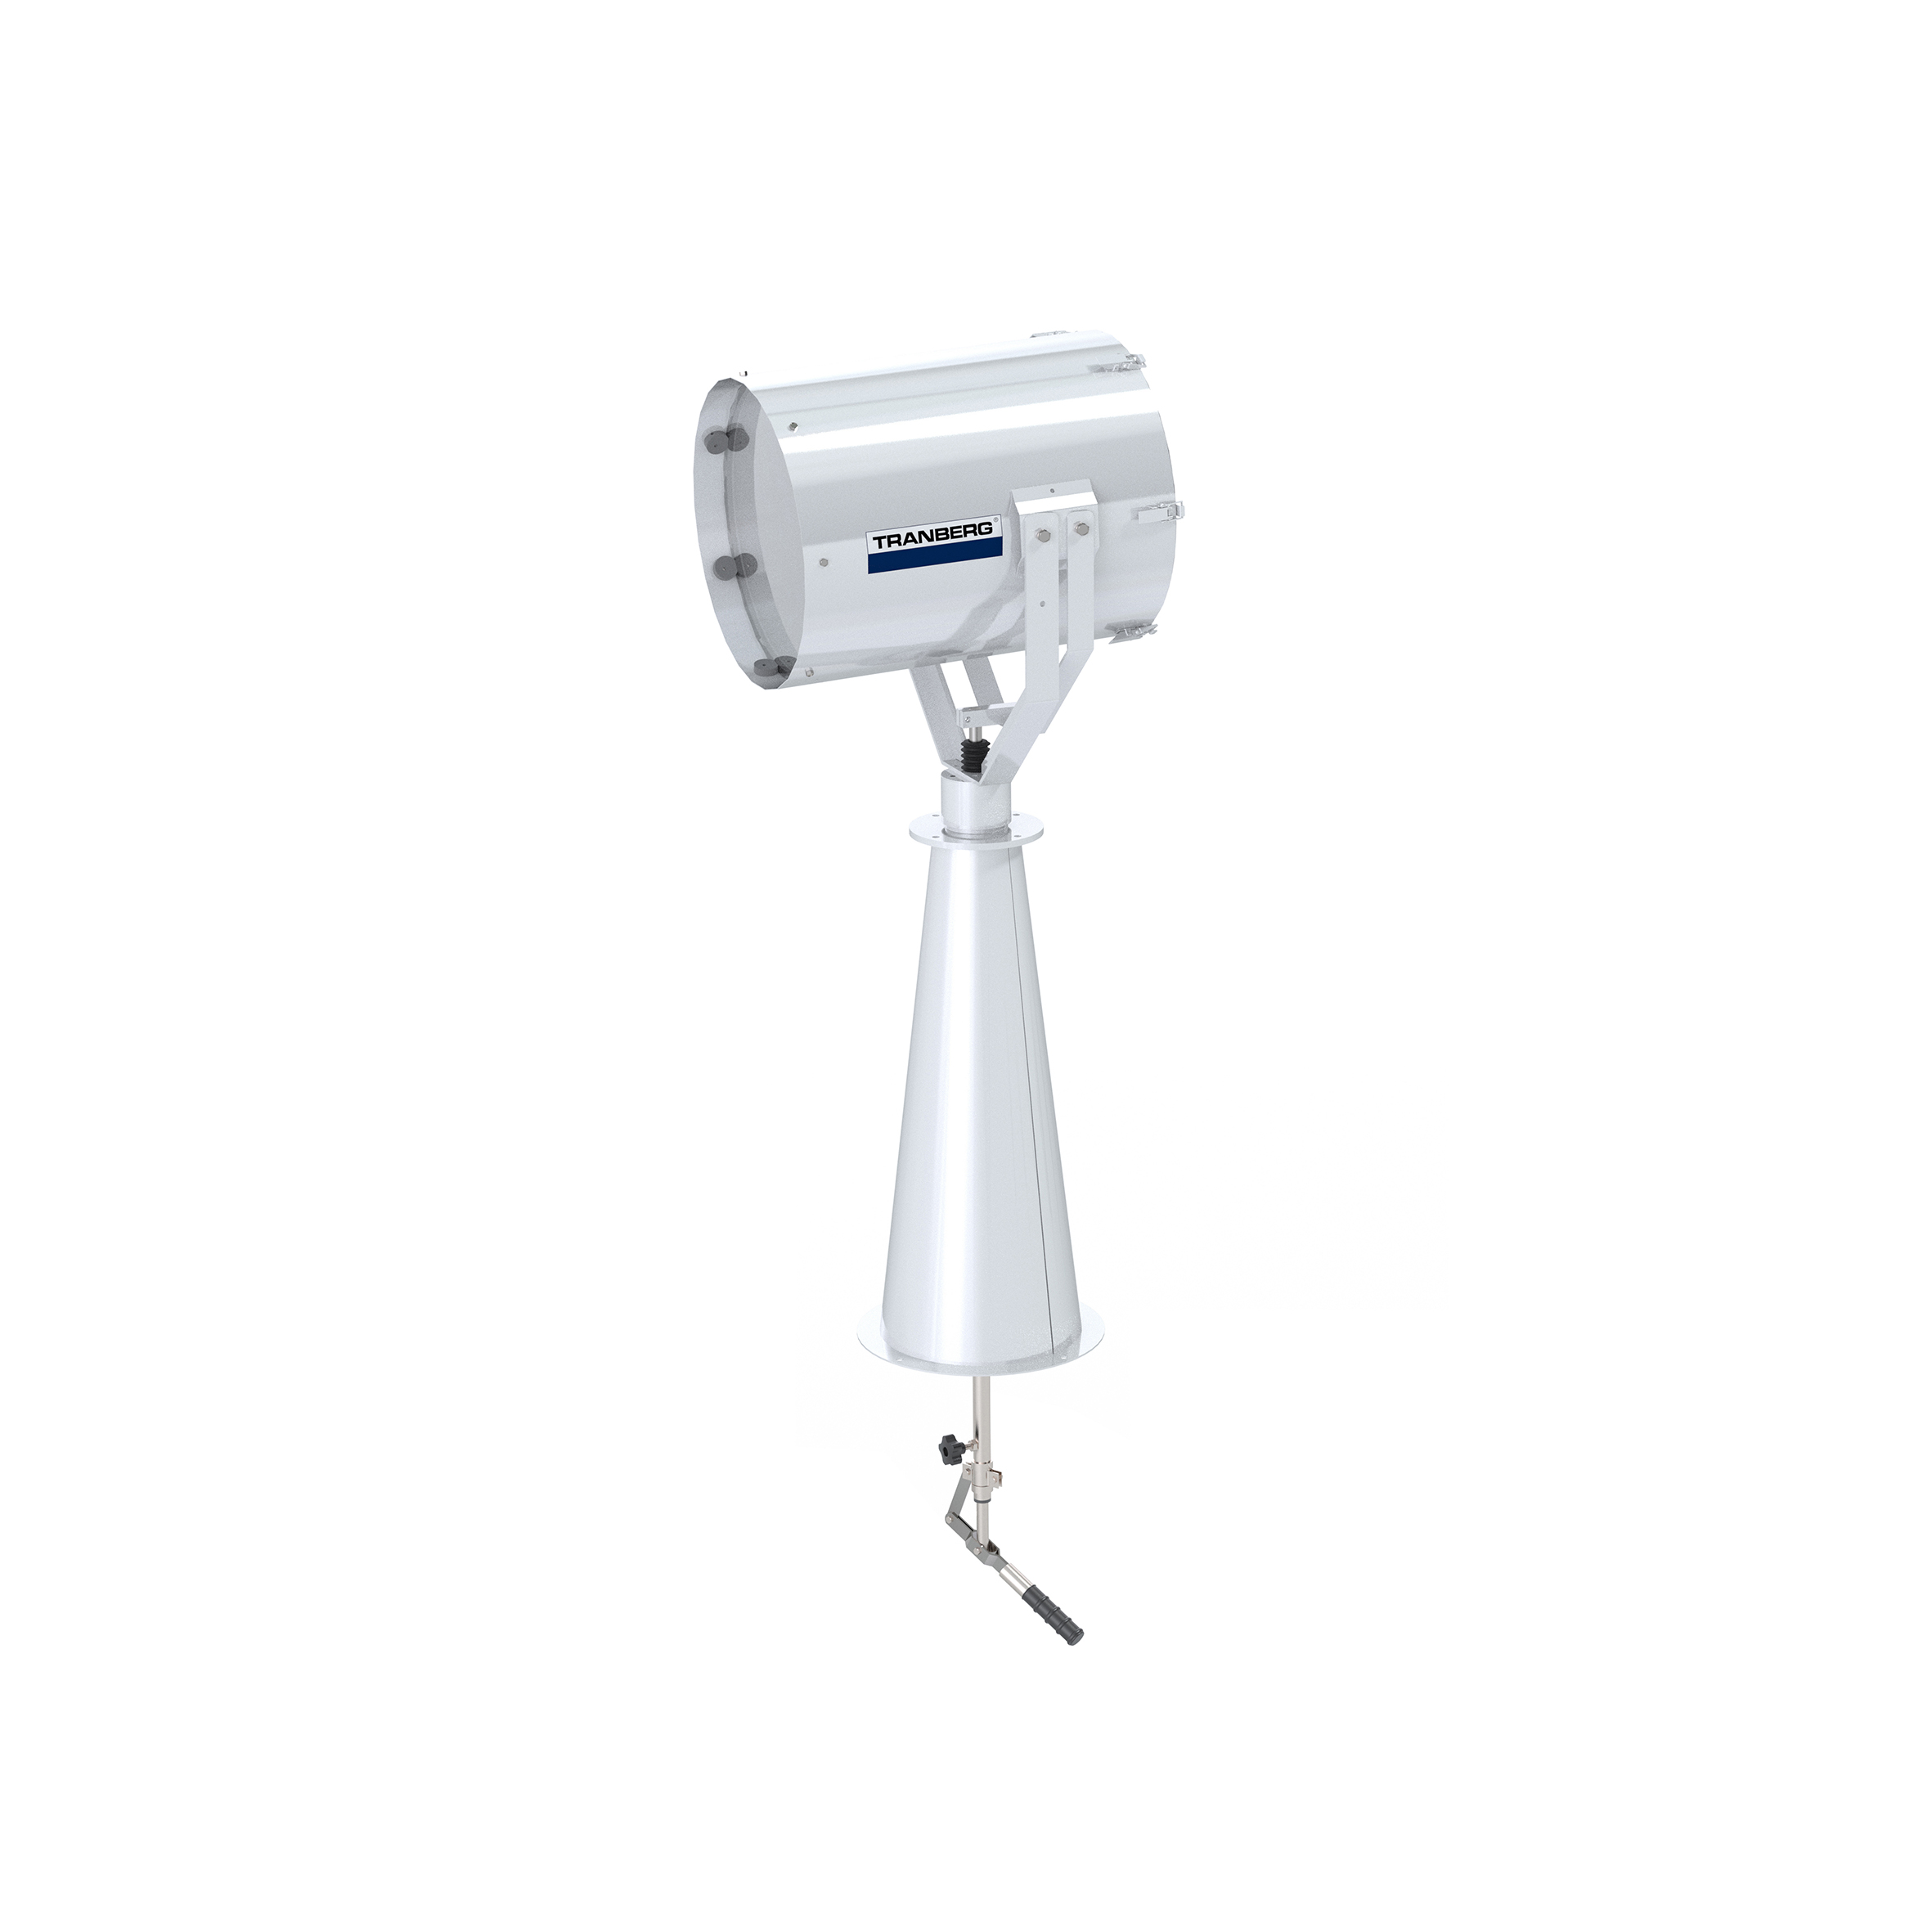 TEF 2630 Searchlight: Xenon 1000W bulb incl, 230V, Bridge Controlled, Stainless Steel, W/300 mm pede photo